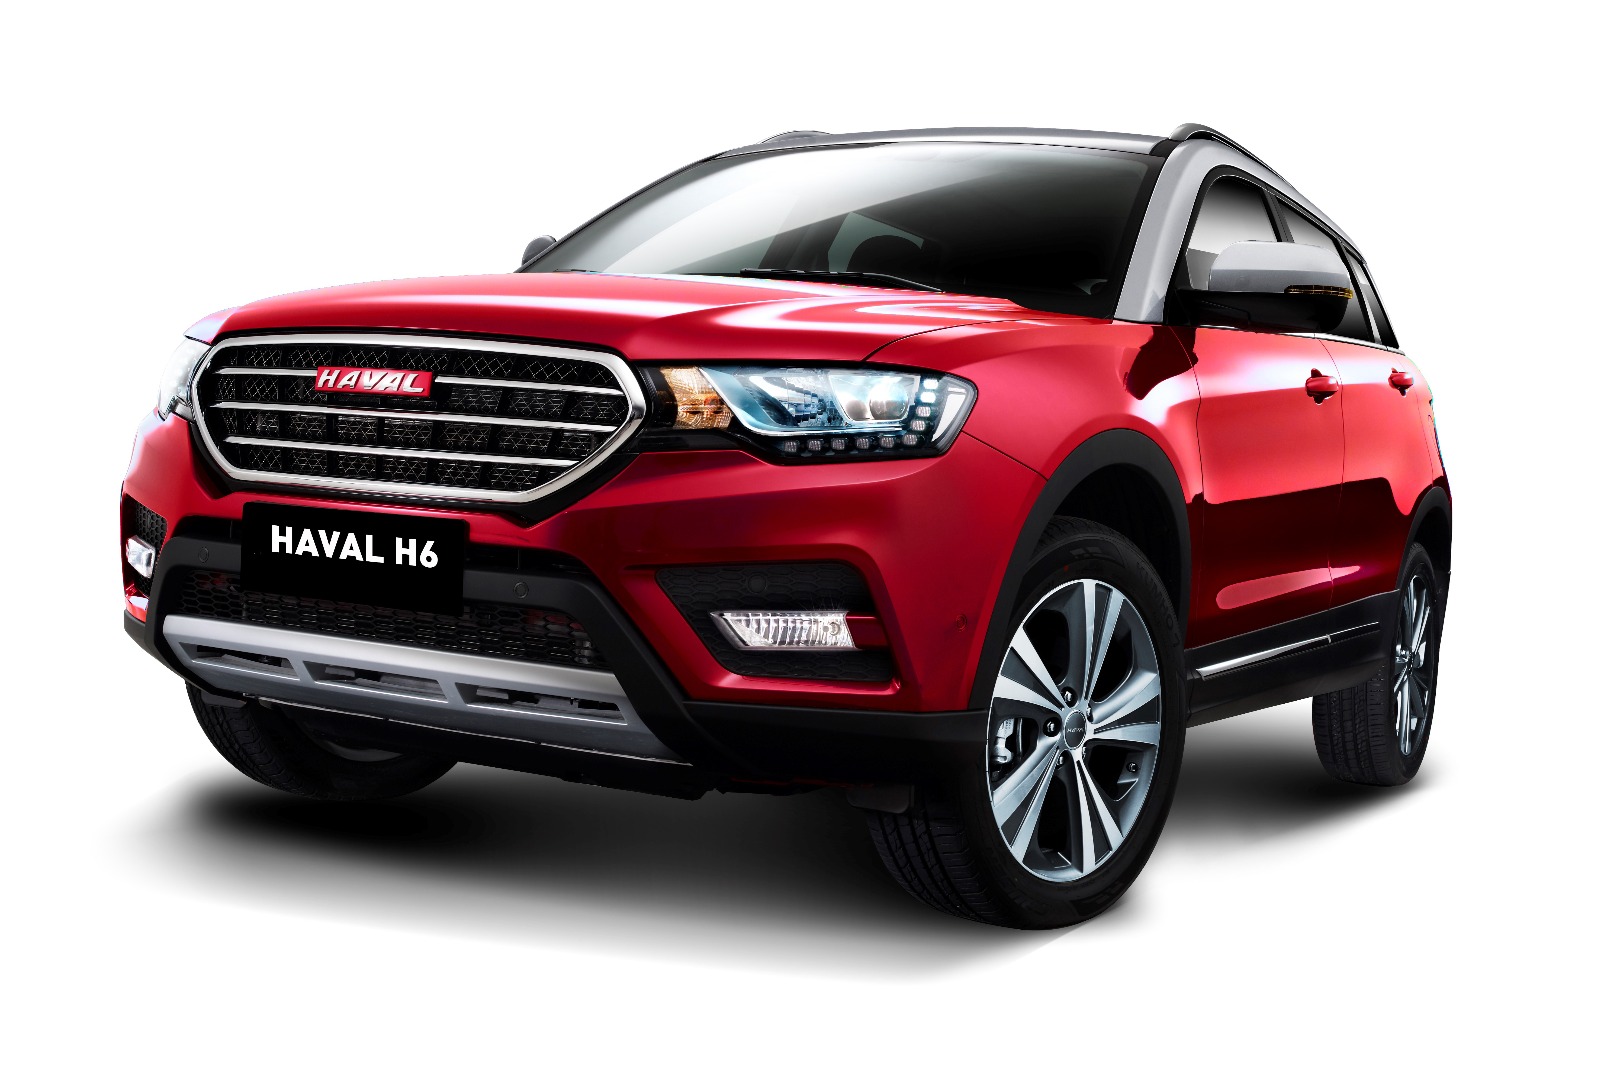 News - Haval H6 To Debut In Australia By September